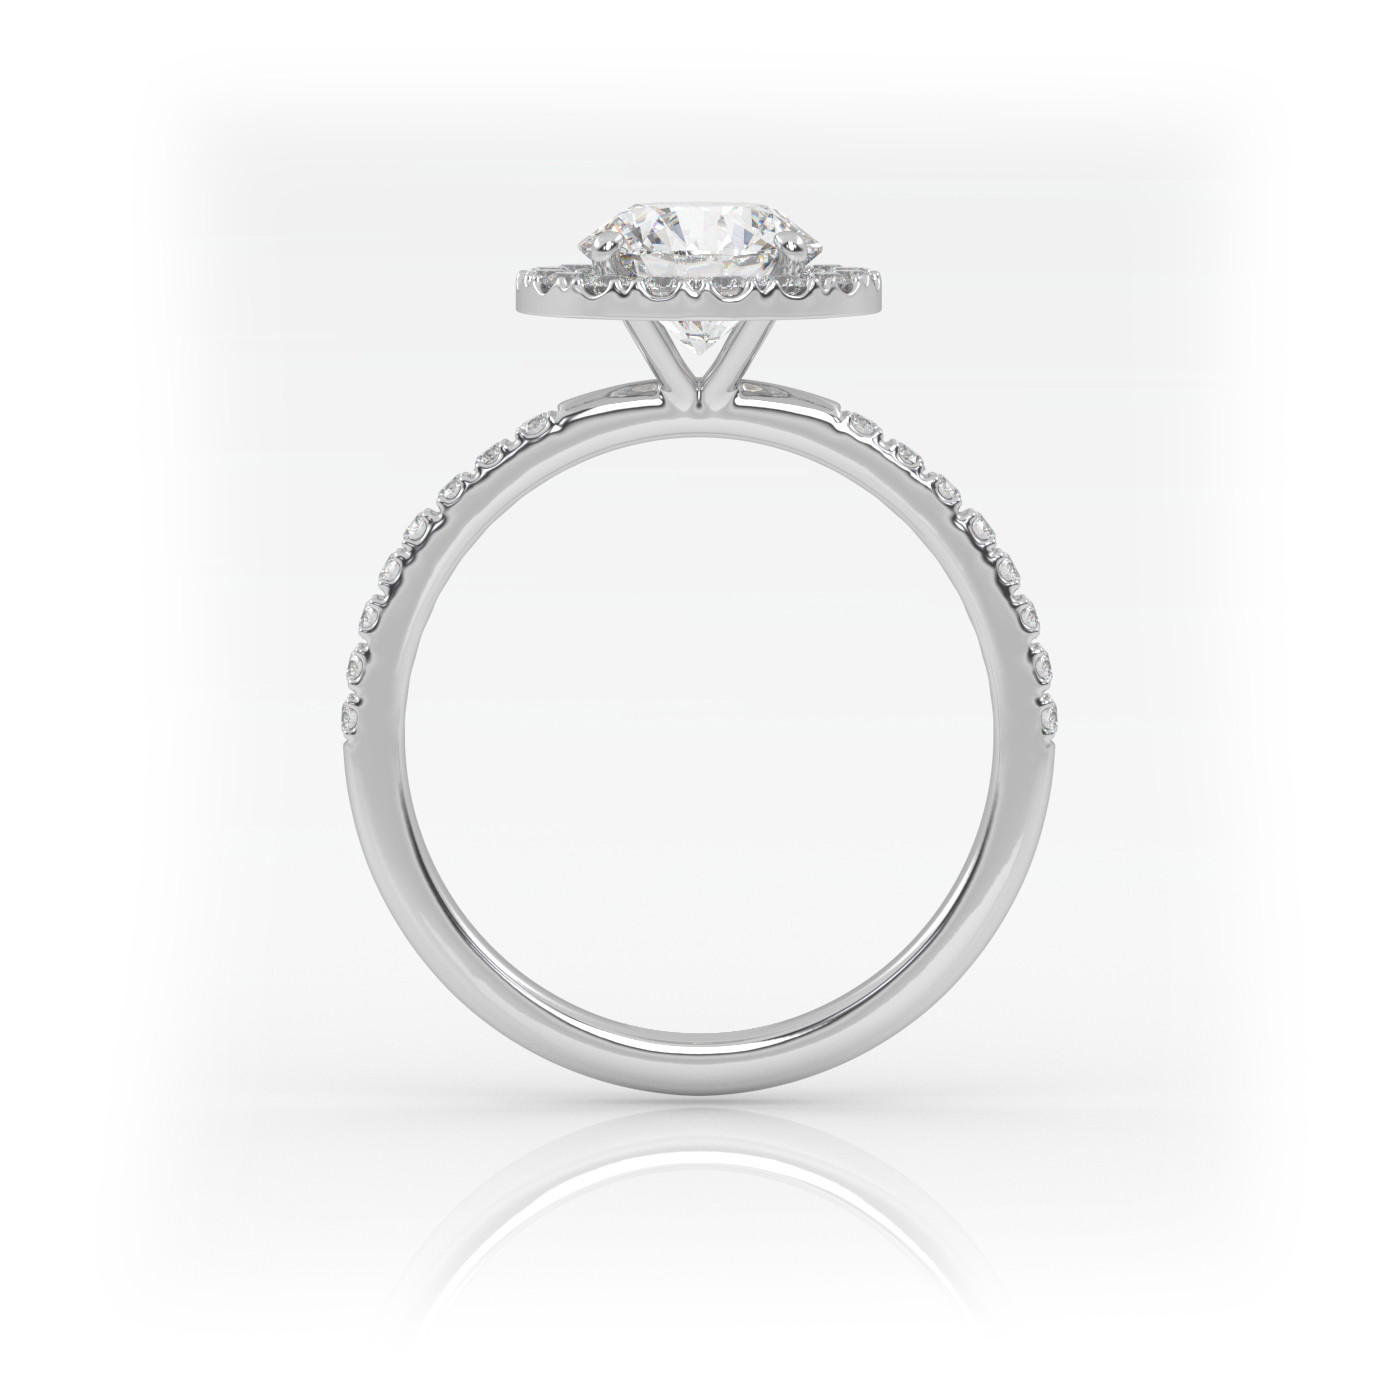 18K WHITE GOLD Round Cut Diamond Engagement Ring with Halo and Pave style